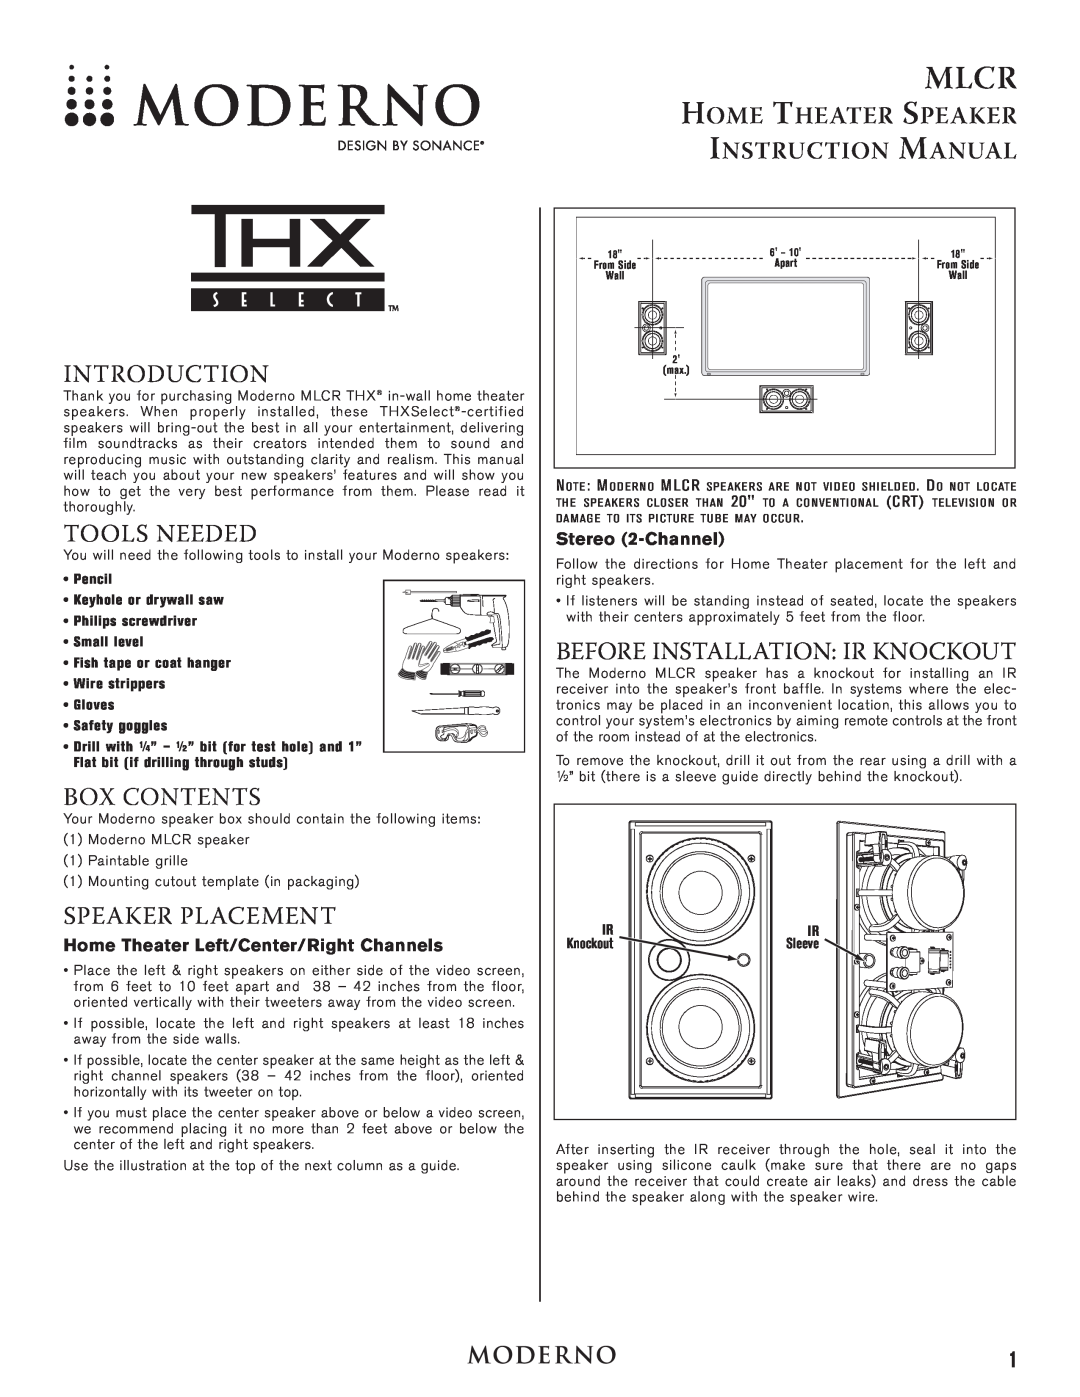 Moderno MLCR instruction manual Introduction, Tools Needed, Box Contents, Speaker Placement, Stereo 2-Channel, Mlcr 